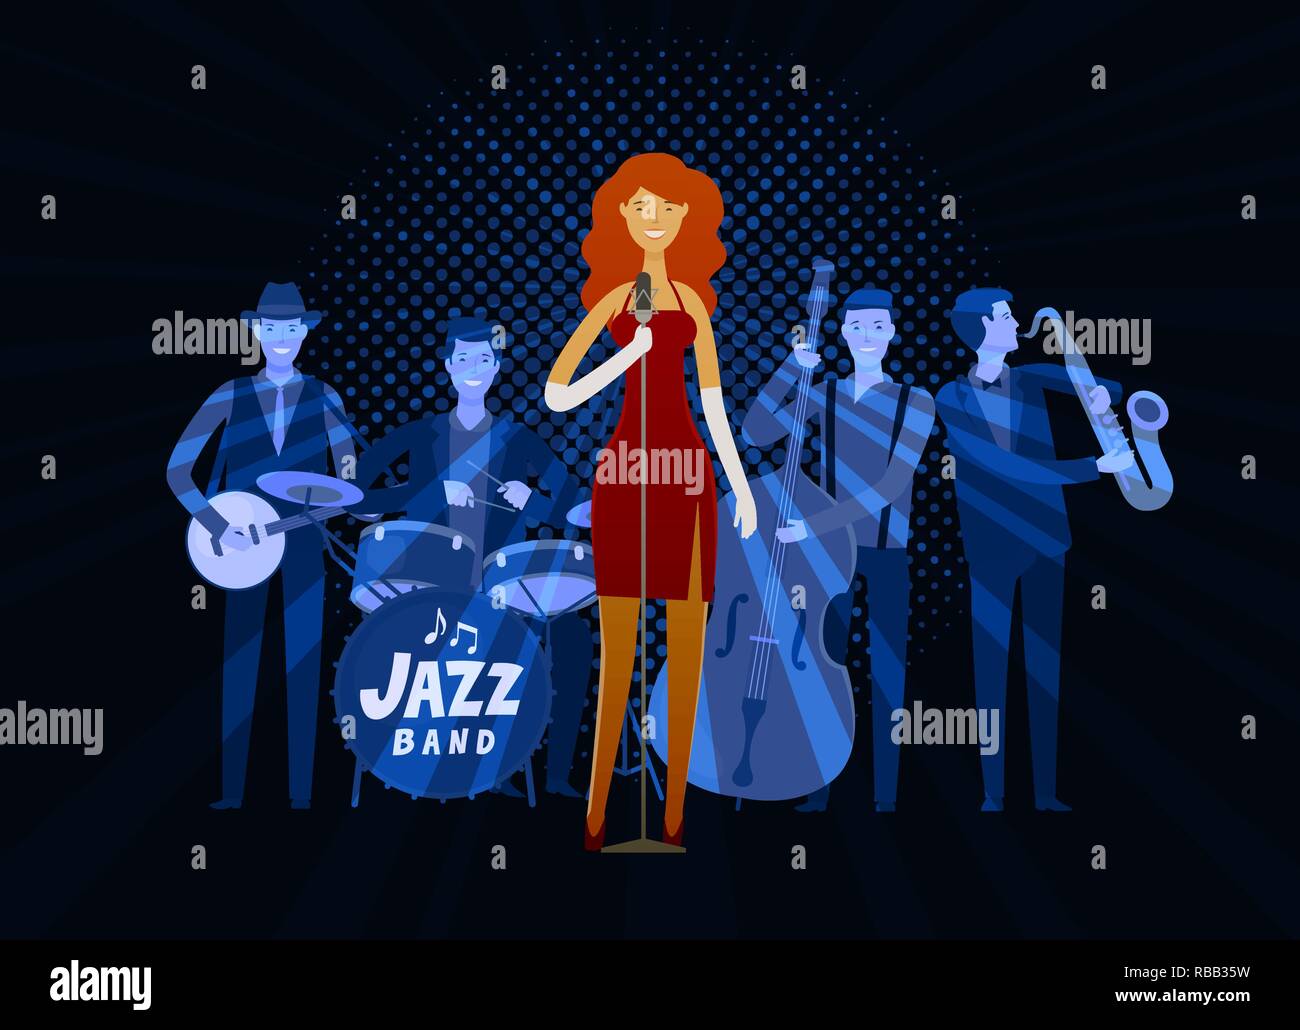 Blues Music High Resolution Stock Photography and Images - Alamy